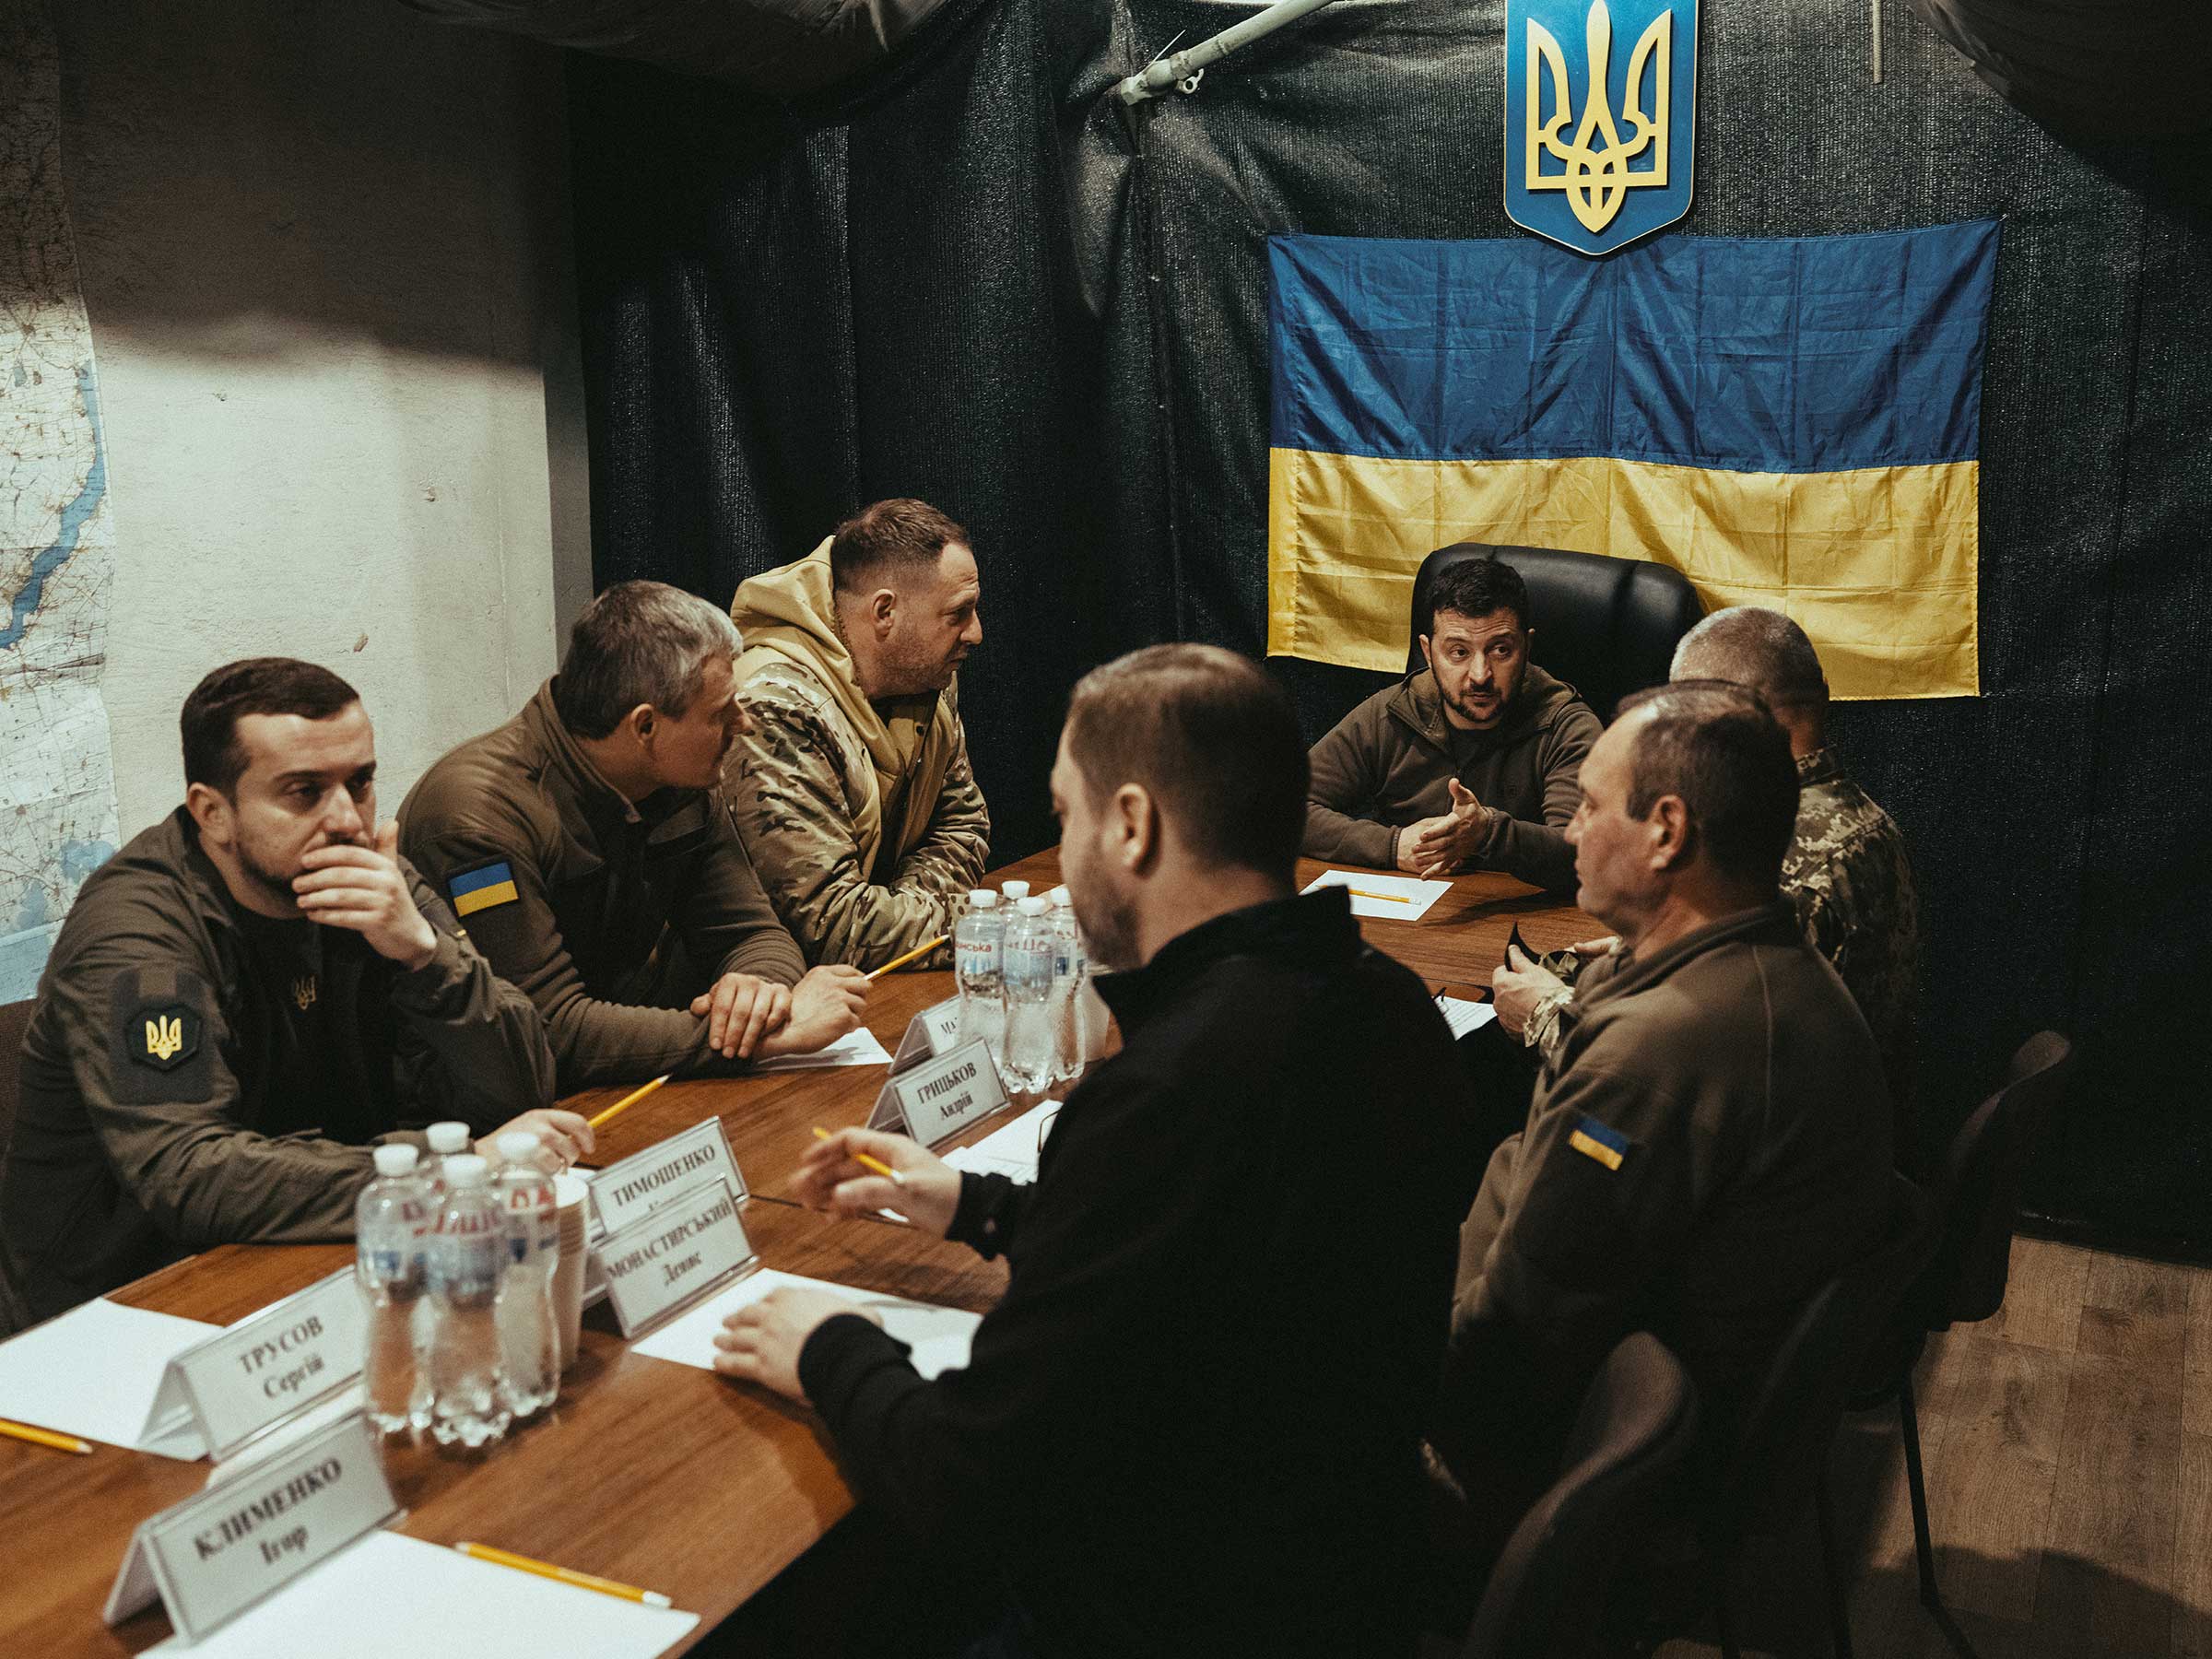 Ukrainian President <a href="https://time.com/person-of-the-year-2022-volodymyr-zelensky/">Volodymyr Zelensky</a> meets with military advisers in a hidden bomb-proof bunker near the front lines in Kherson on Nov. 14. (Maxim Dondyuk for TIME)